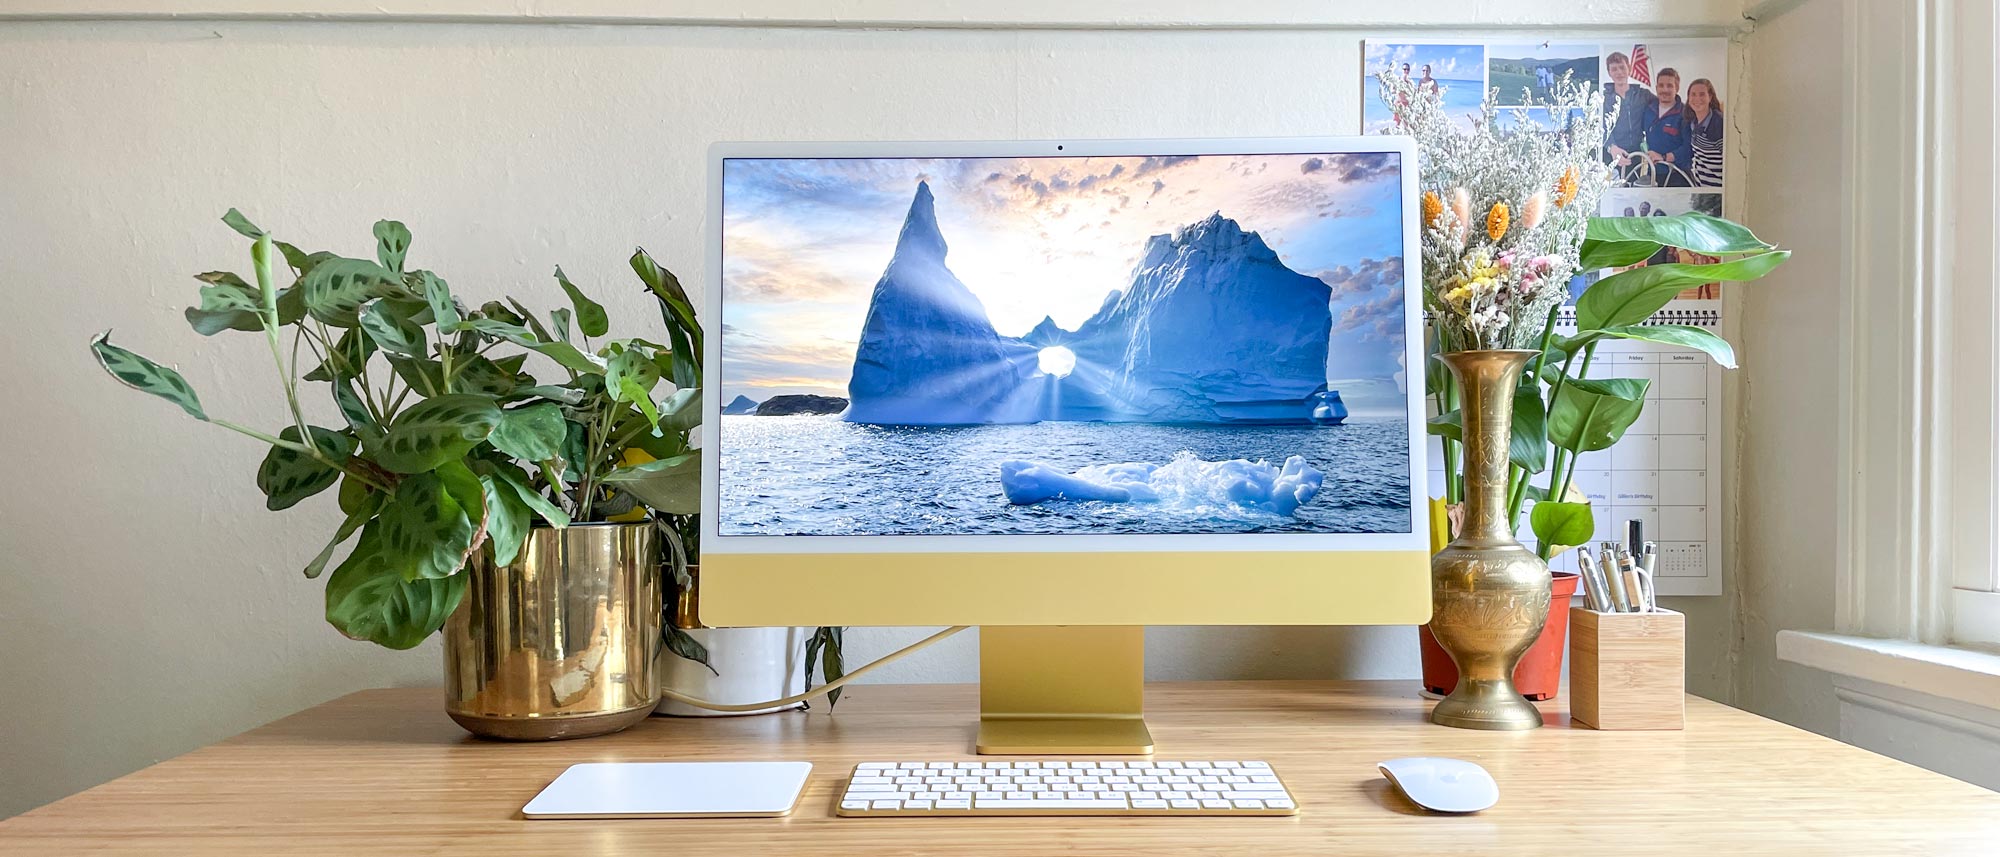 PC/タブレット デスクトップ型PC Apple iMac 2021 review (24-inch) | Tom's Guide